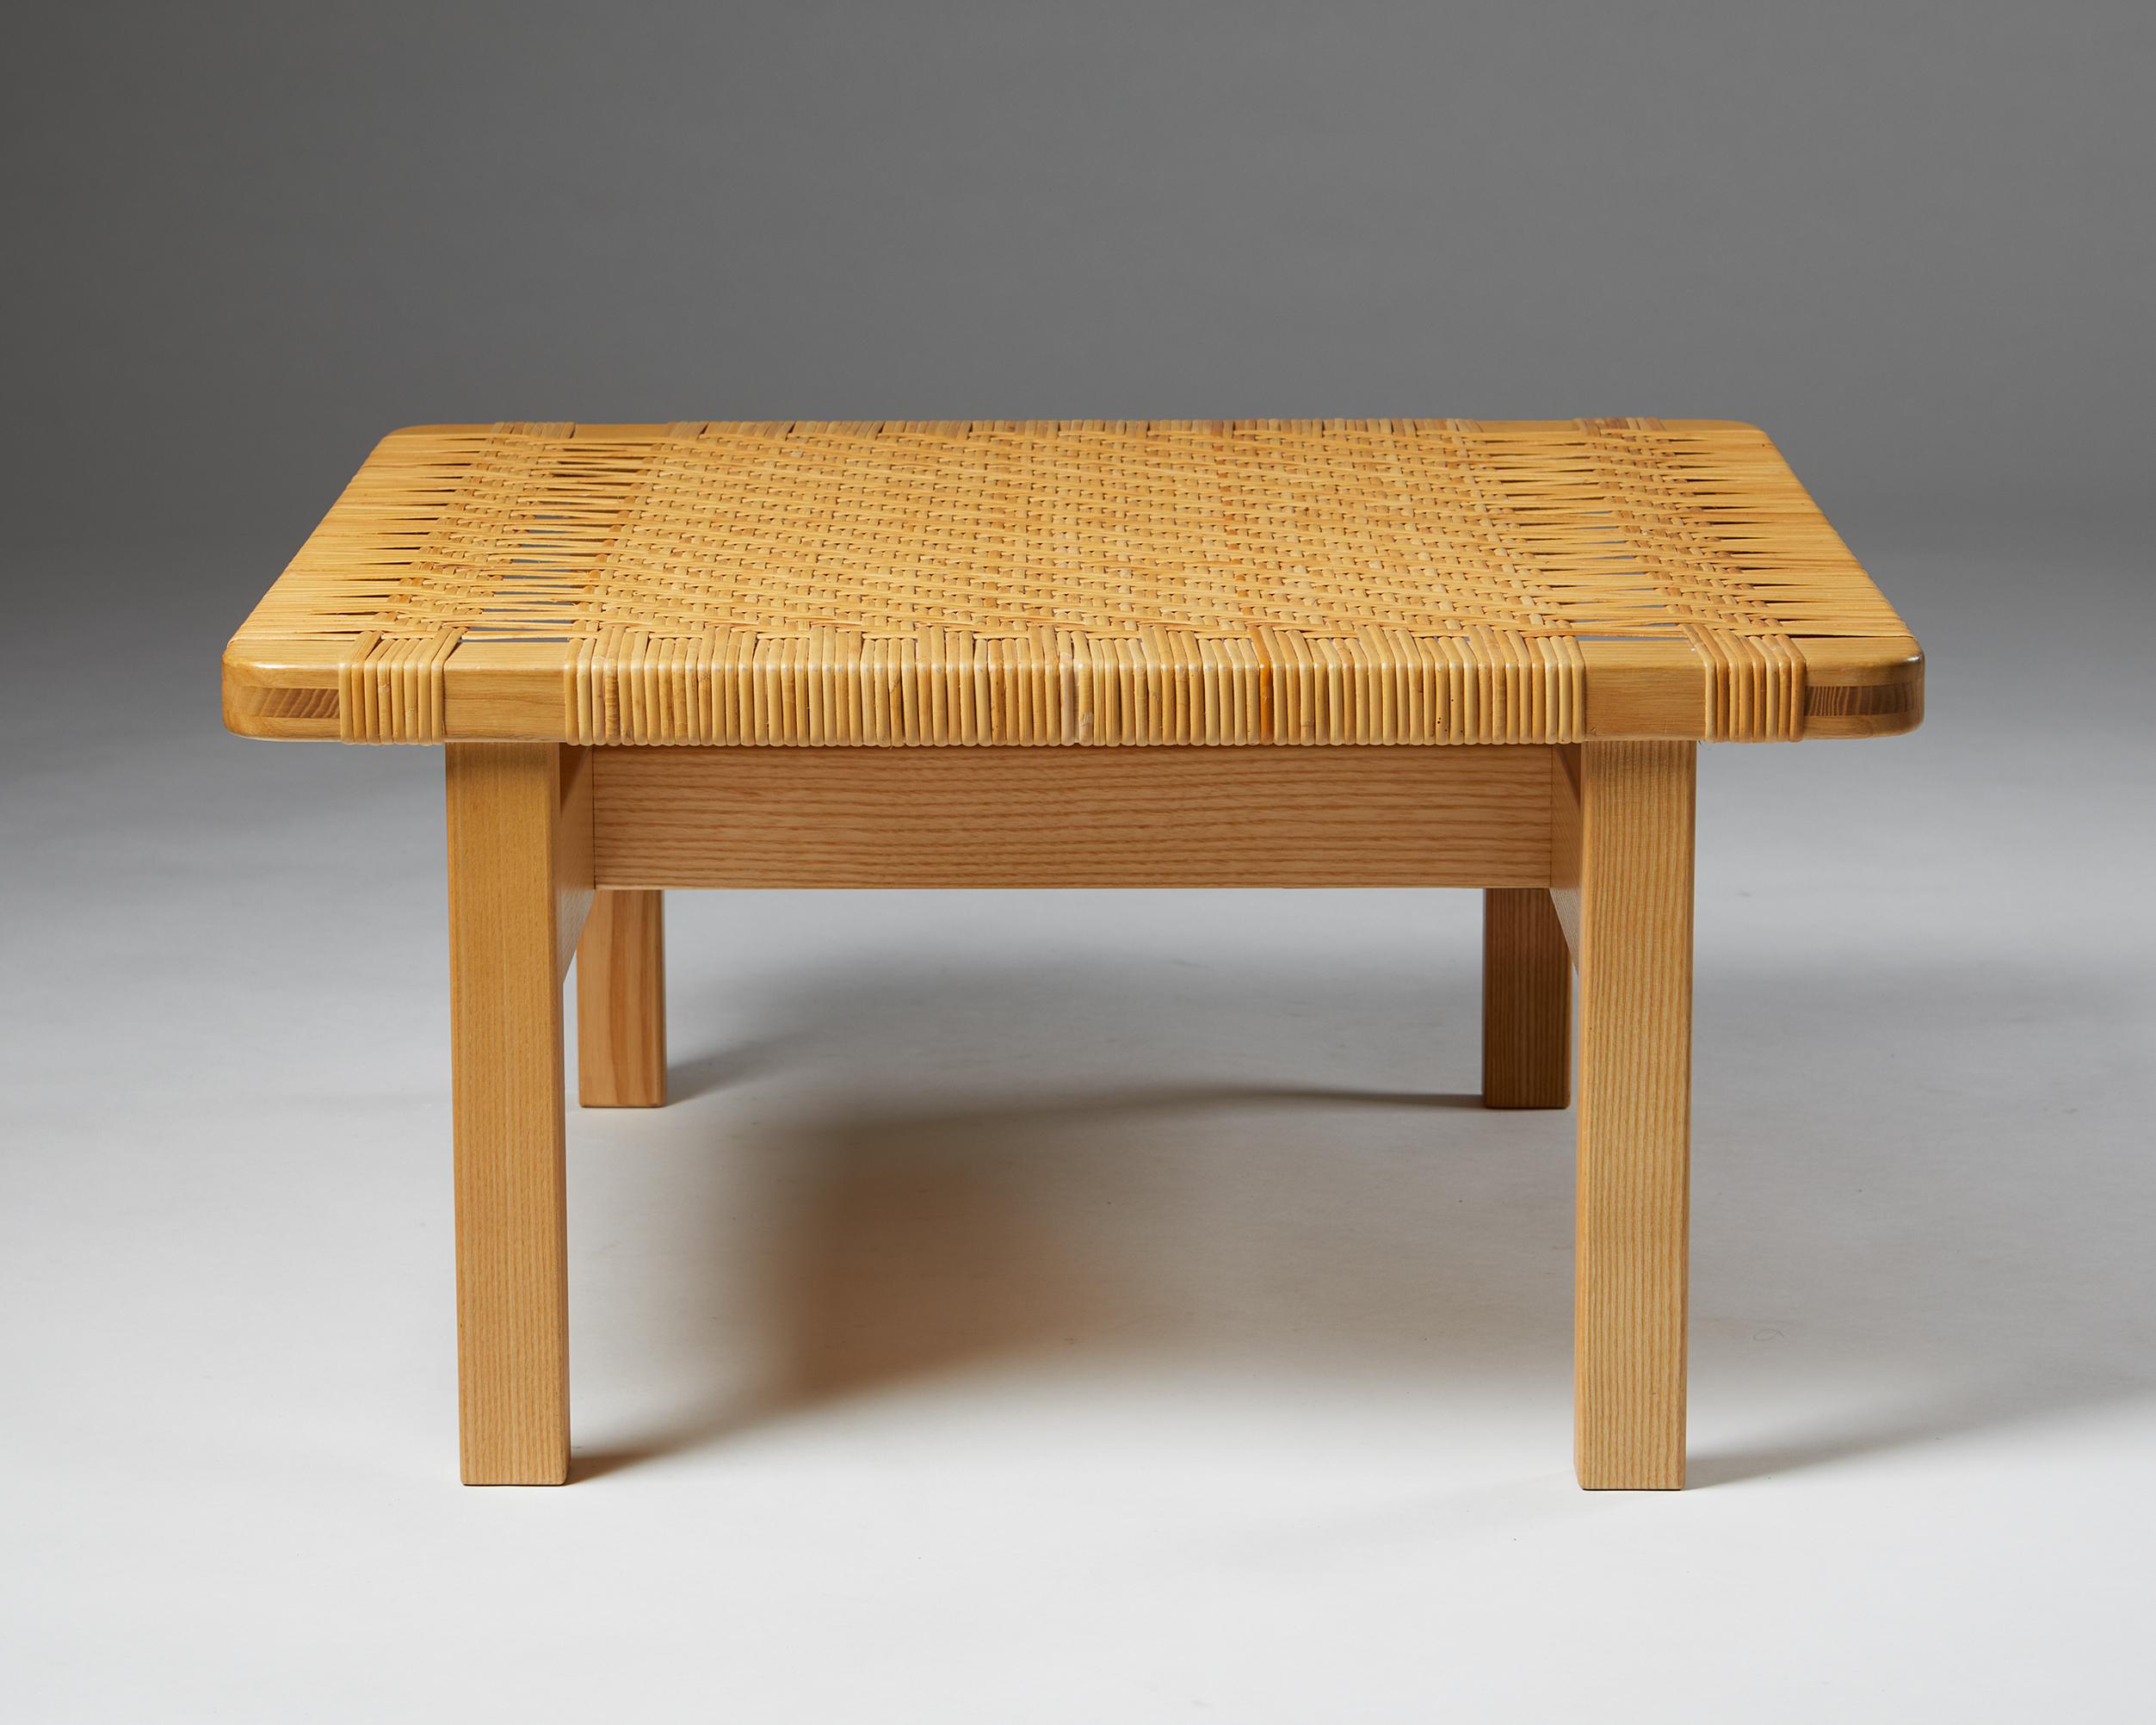 Occasional table/ Bench model 5274, designed by Börge Mogensen for Fredericia Stolefabrik,
Denmark. 1950s.

Oak and cane.

Measurements: 
W: 69 cm/ 27